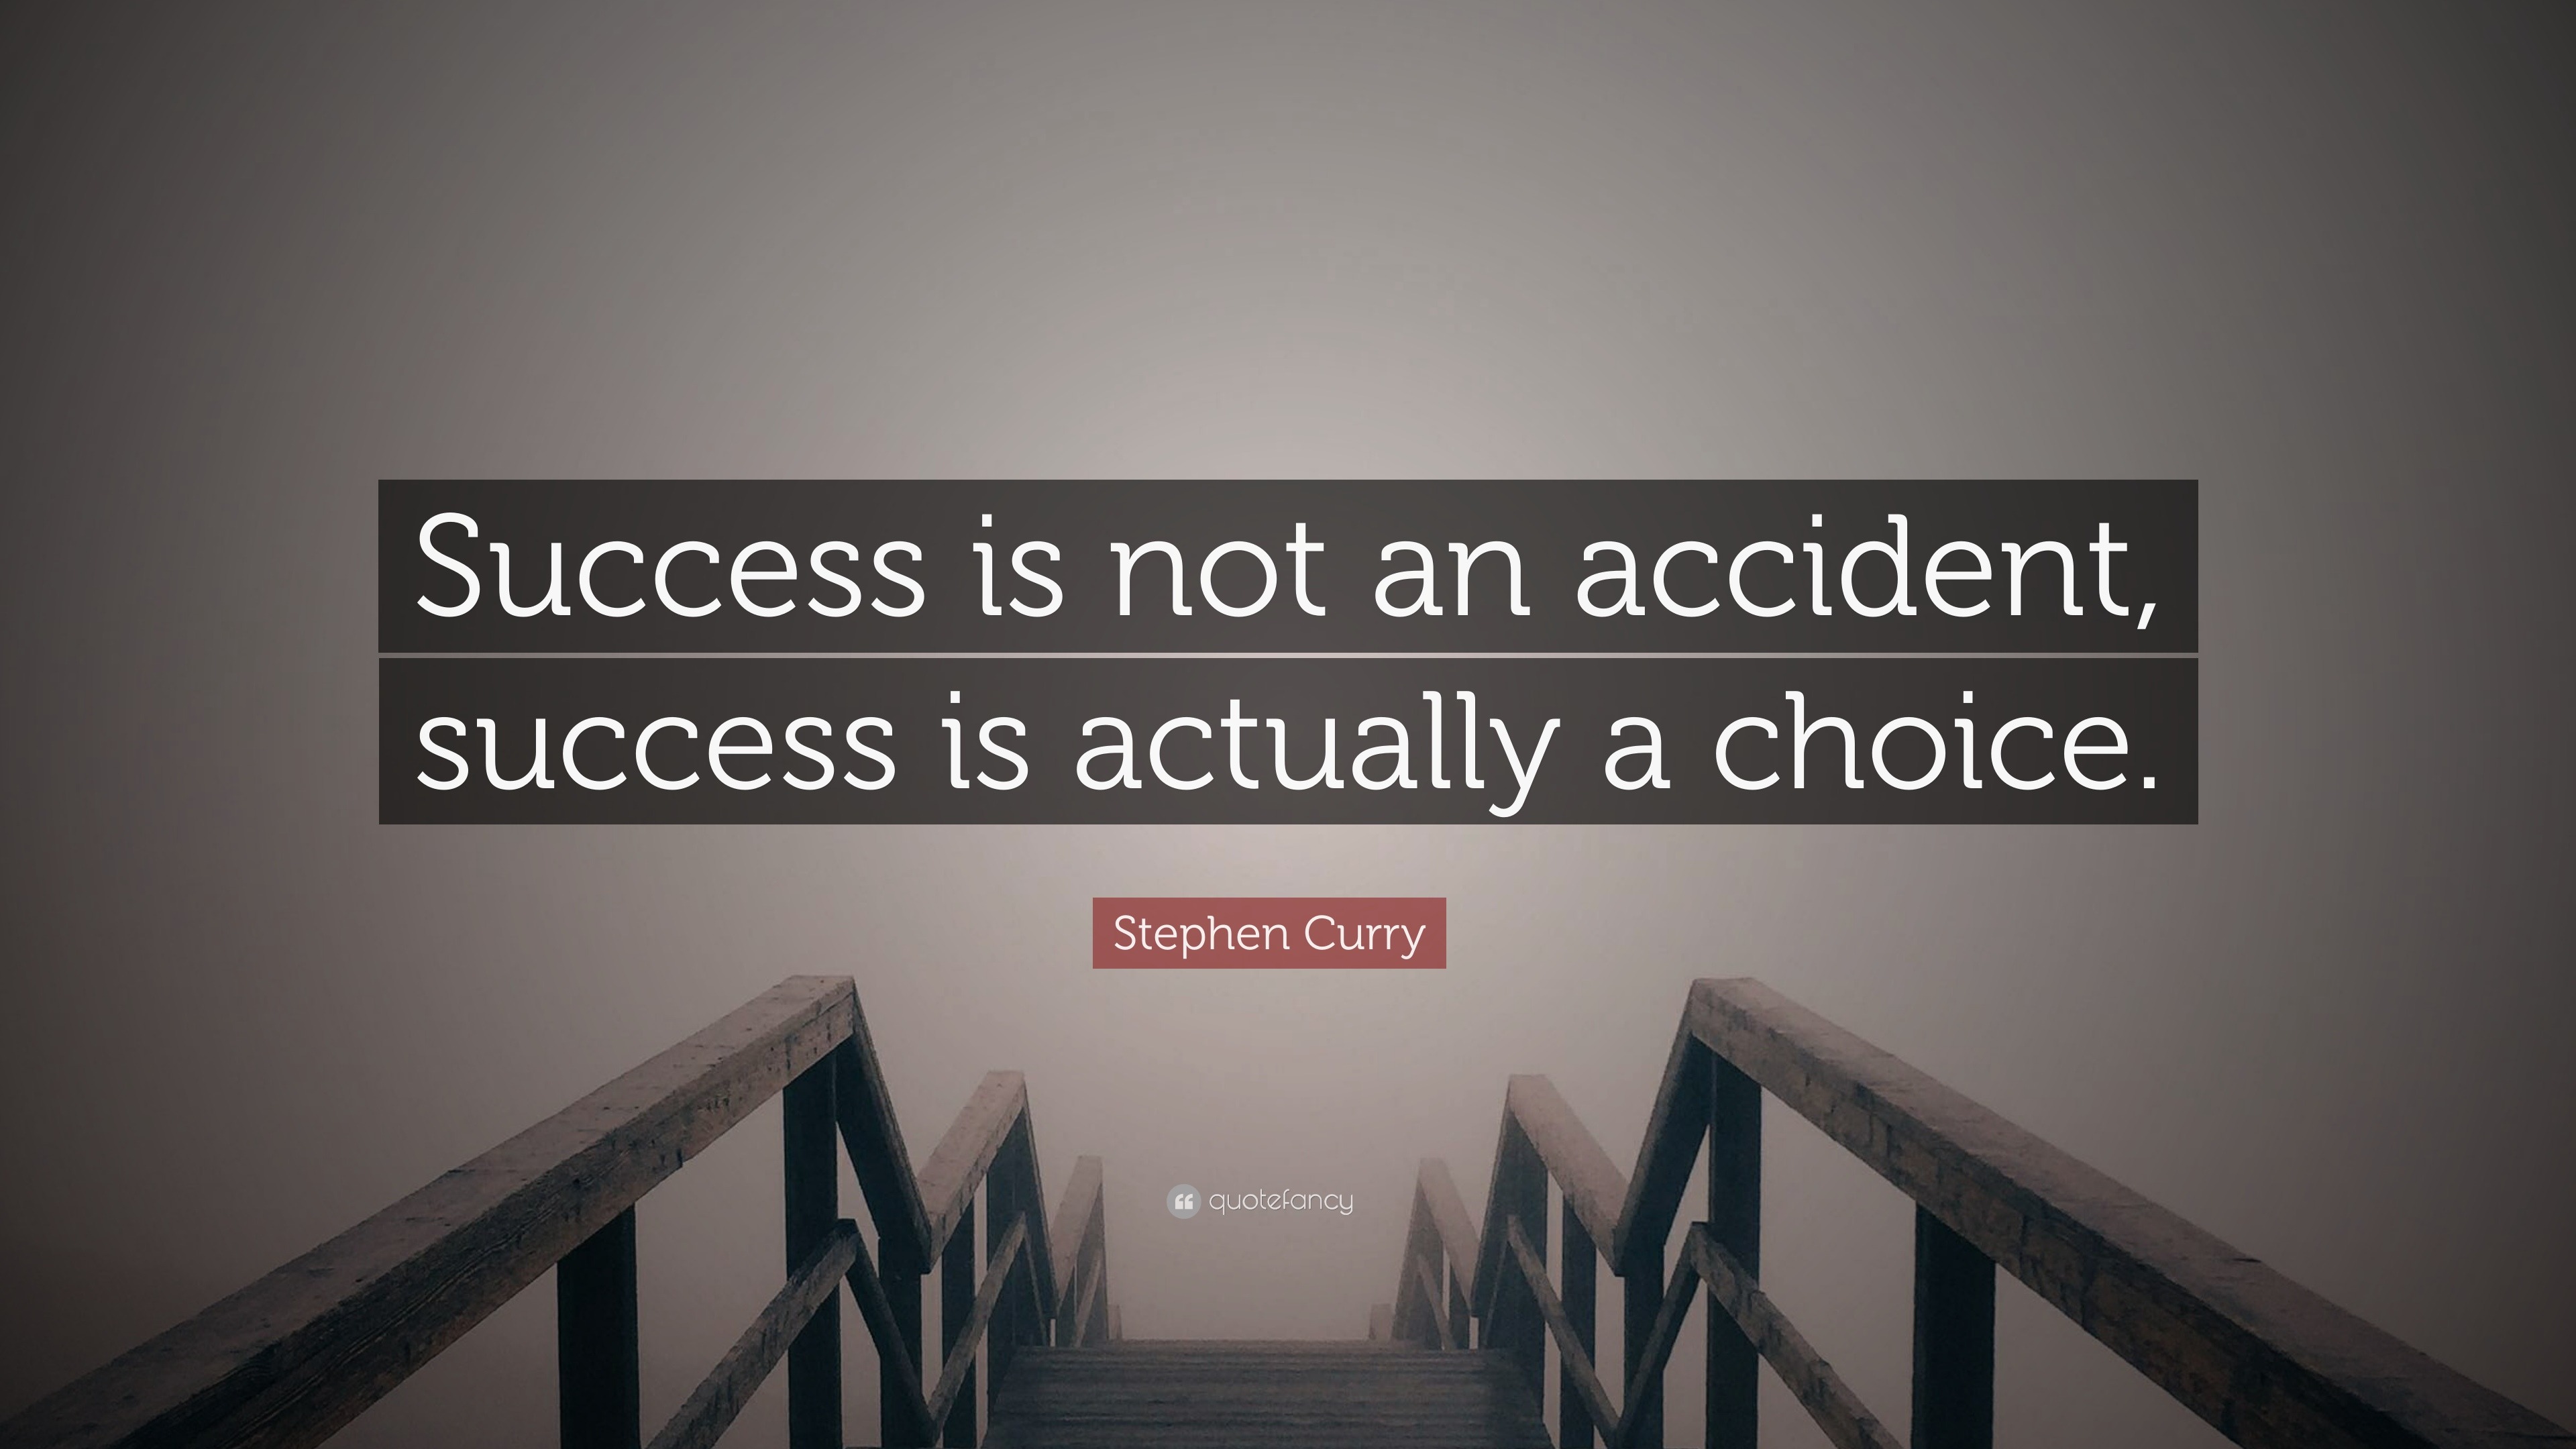 Stephen Curry Quote: “Success Is Not An Accident, Success Is Actually A Choice.”